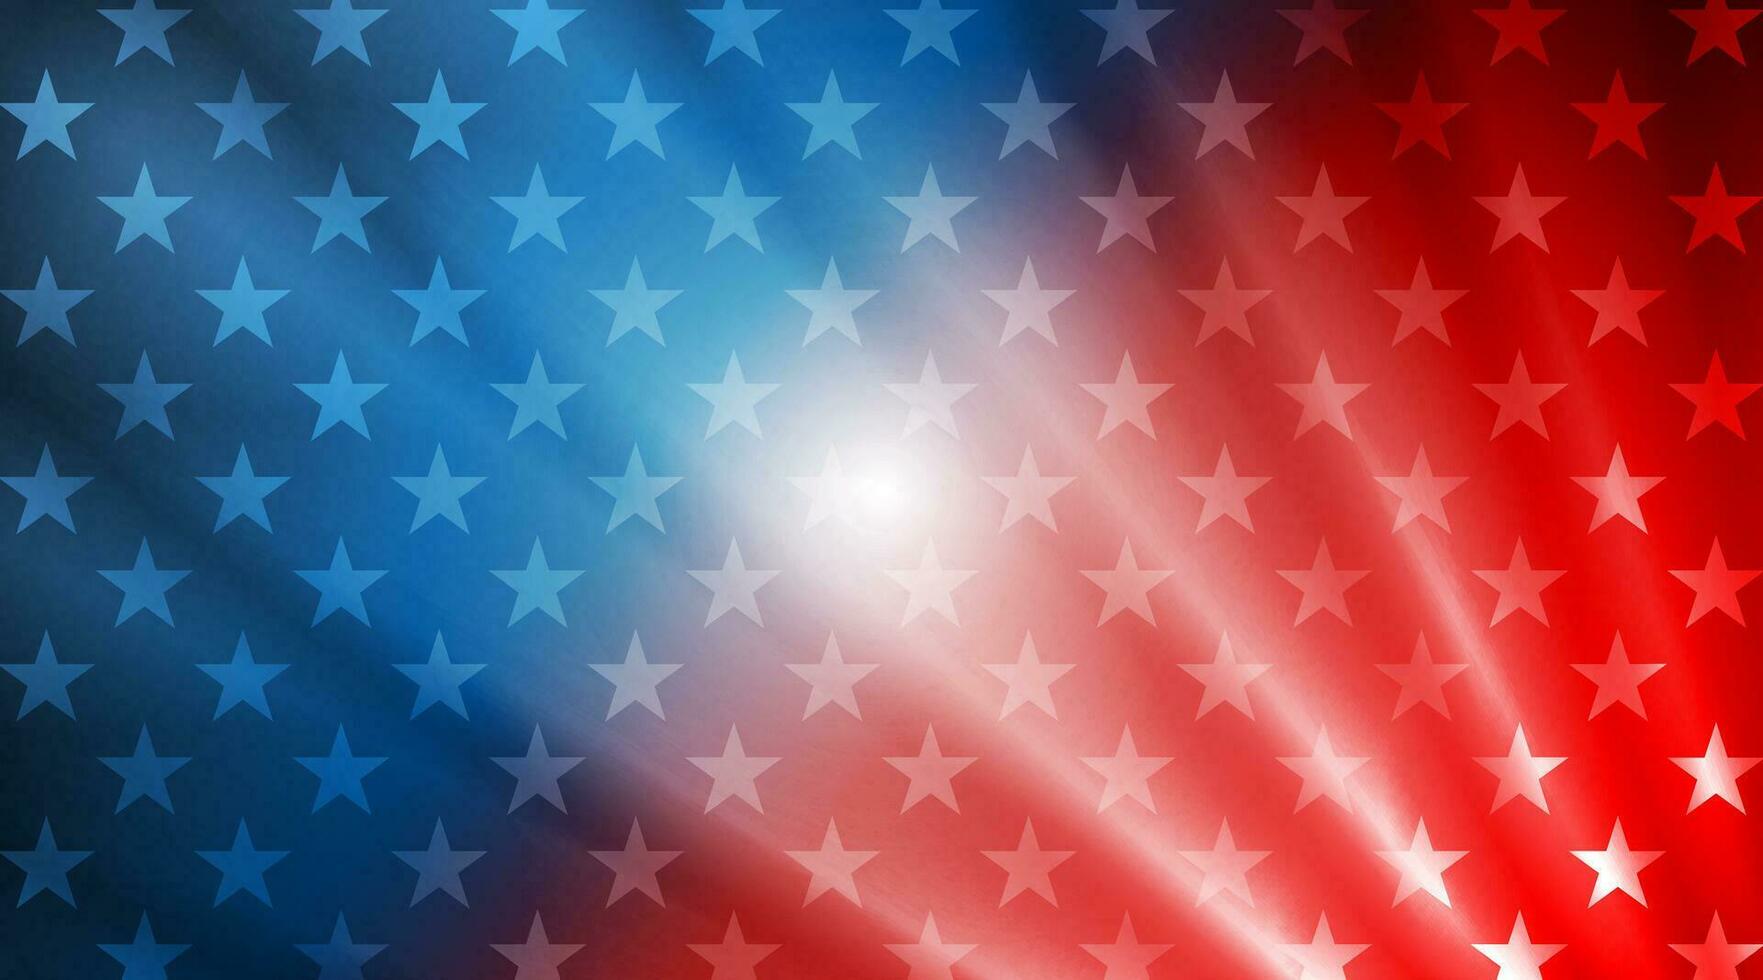 USA flag colors, stars and rays abstract background vector